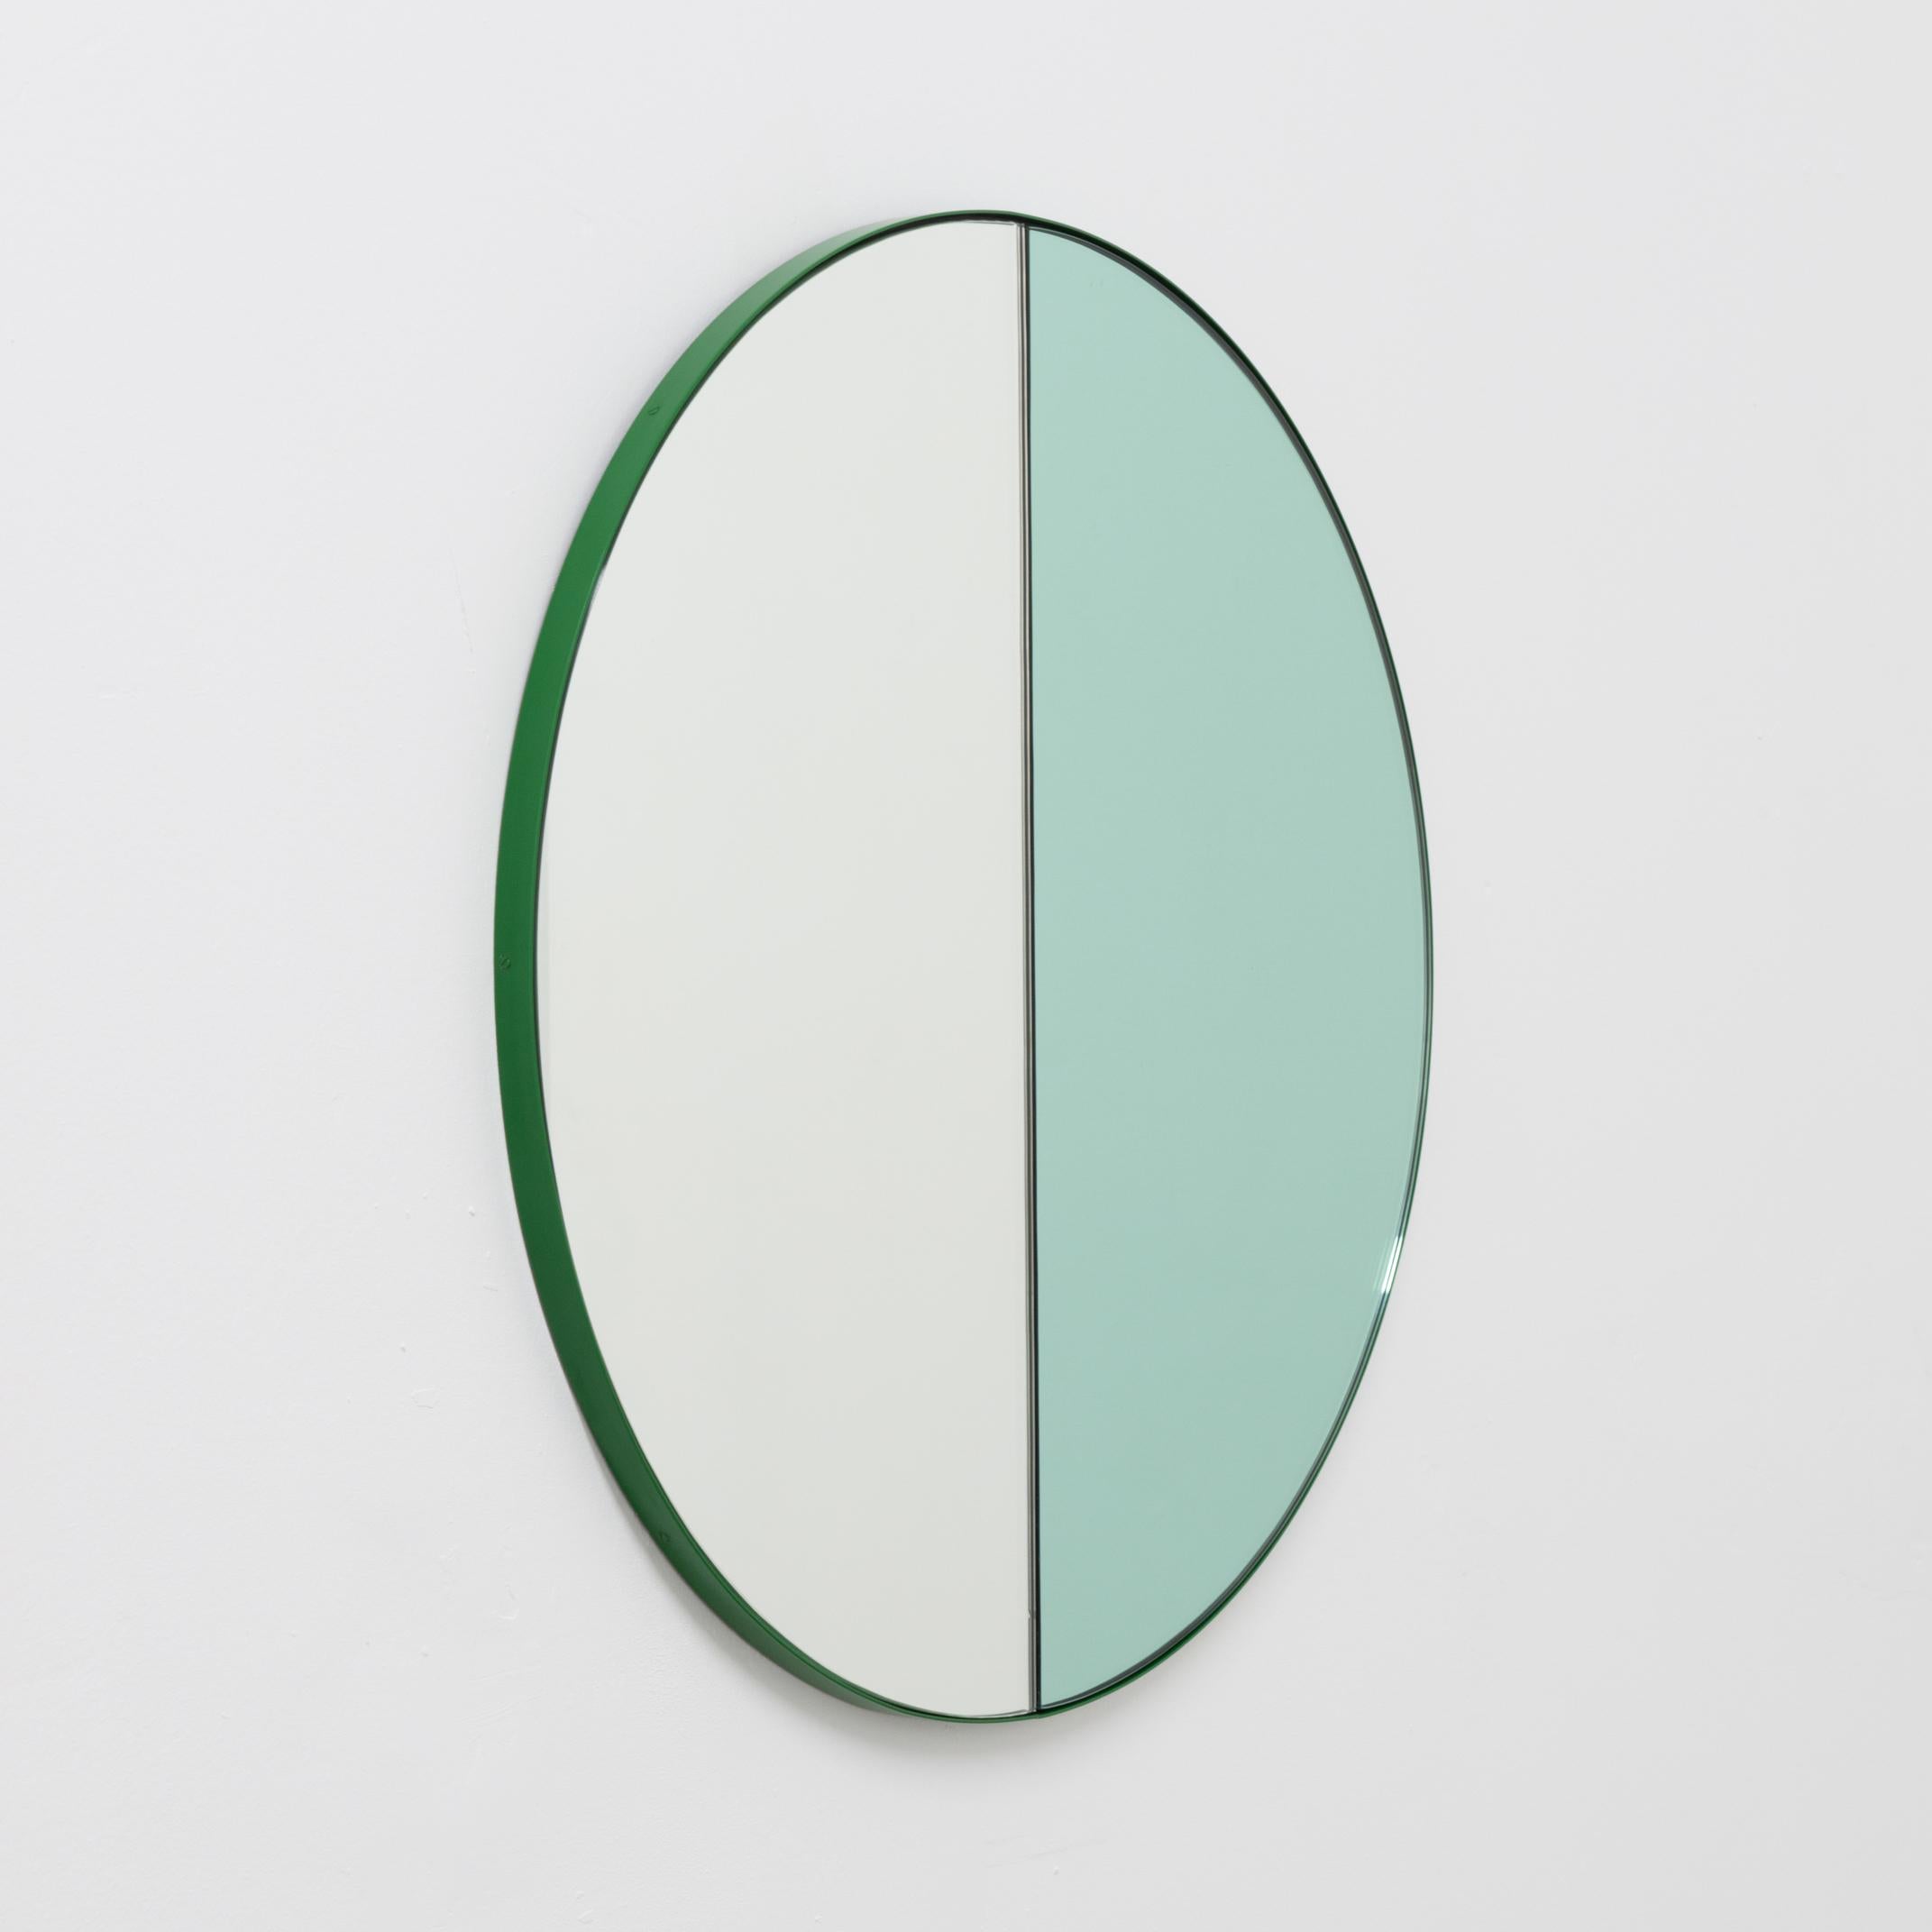 British Orbis Dualis Mixed 'Green + Silver' Round Mirror with Green Frame, Large